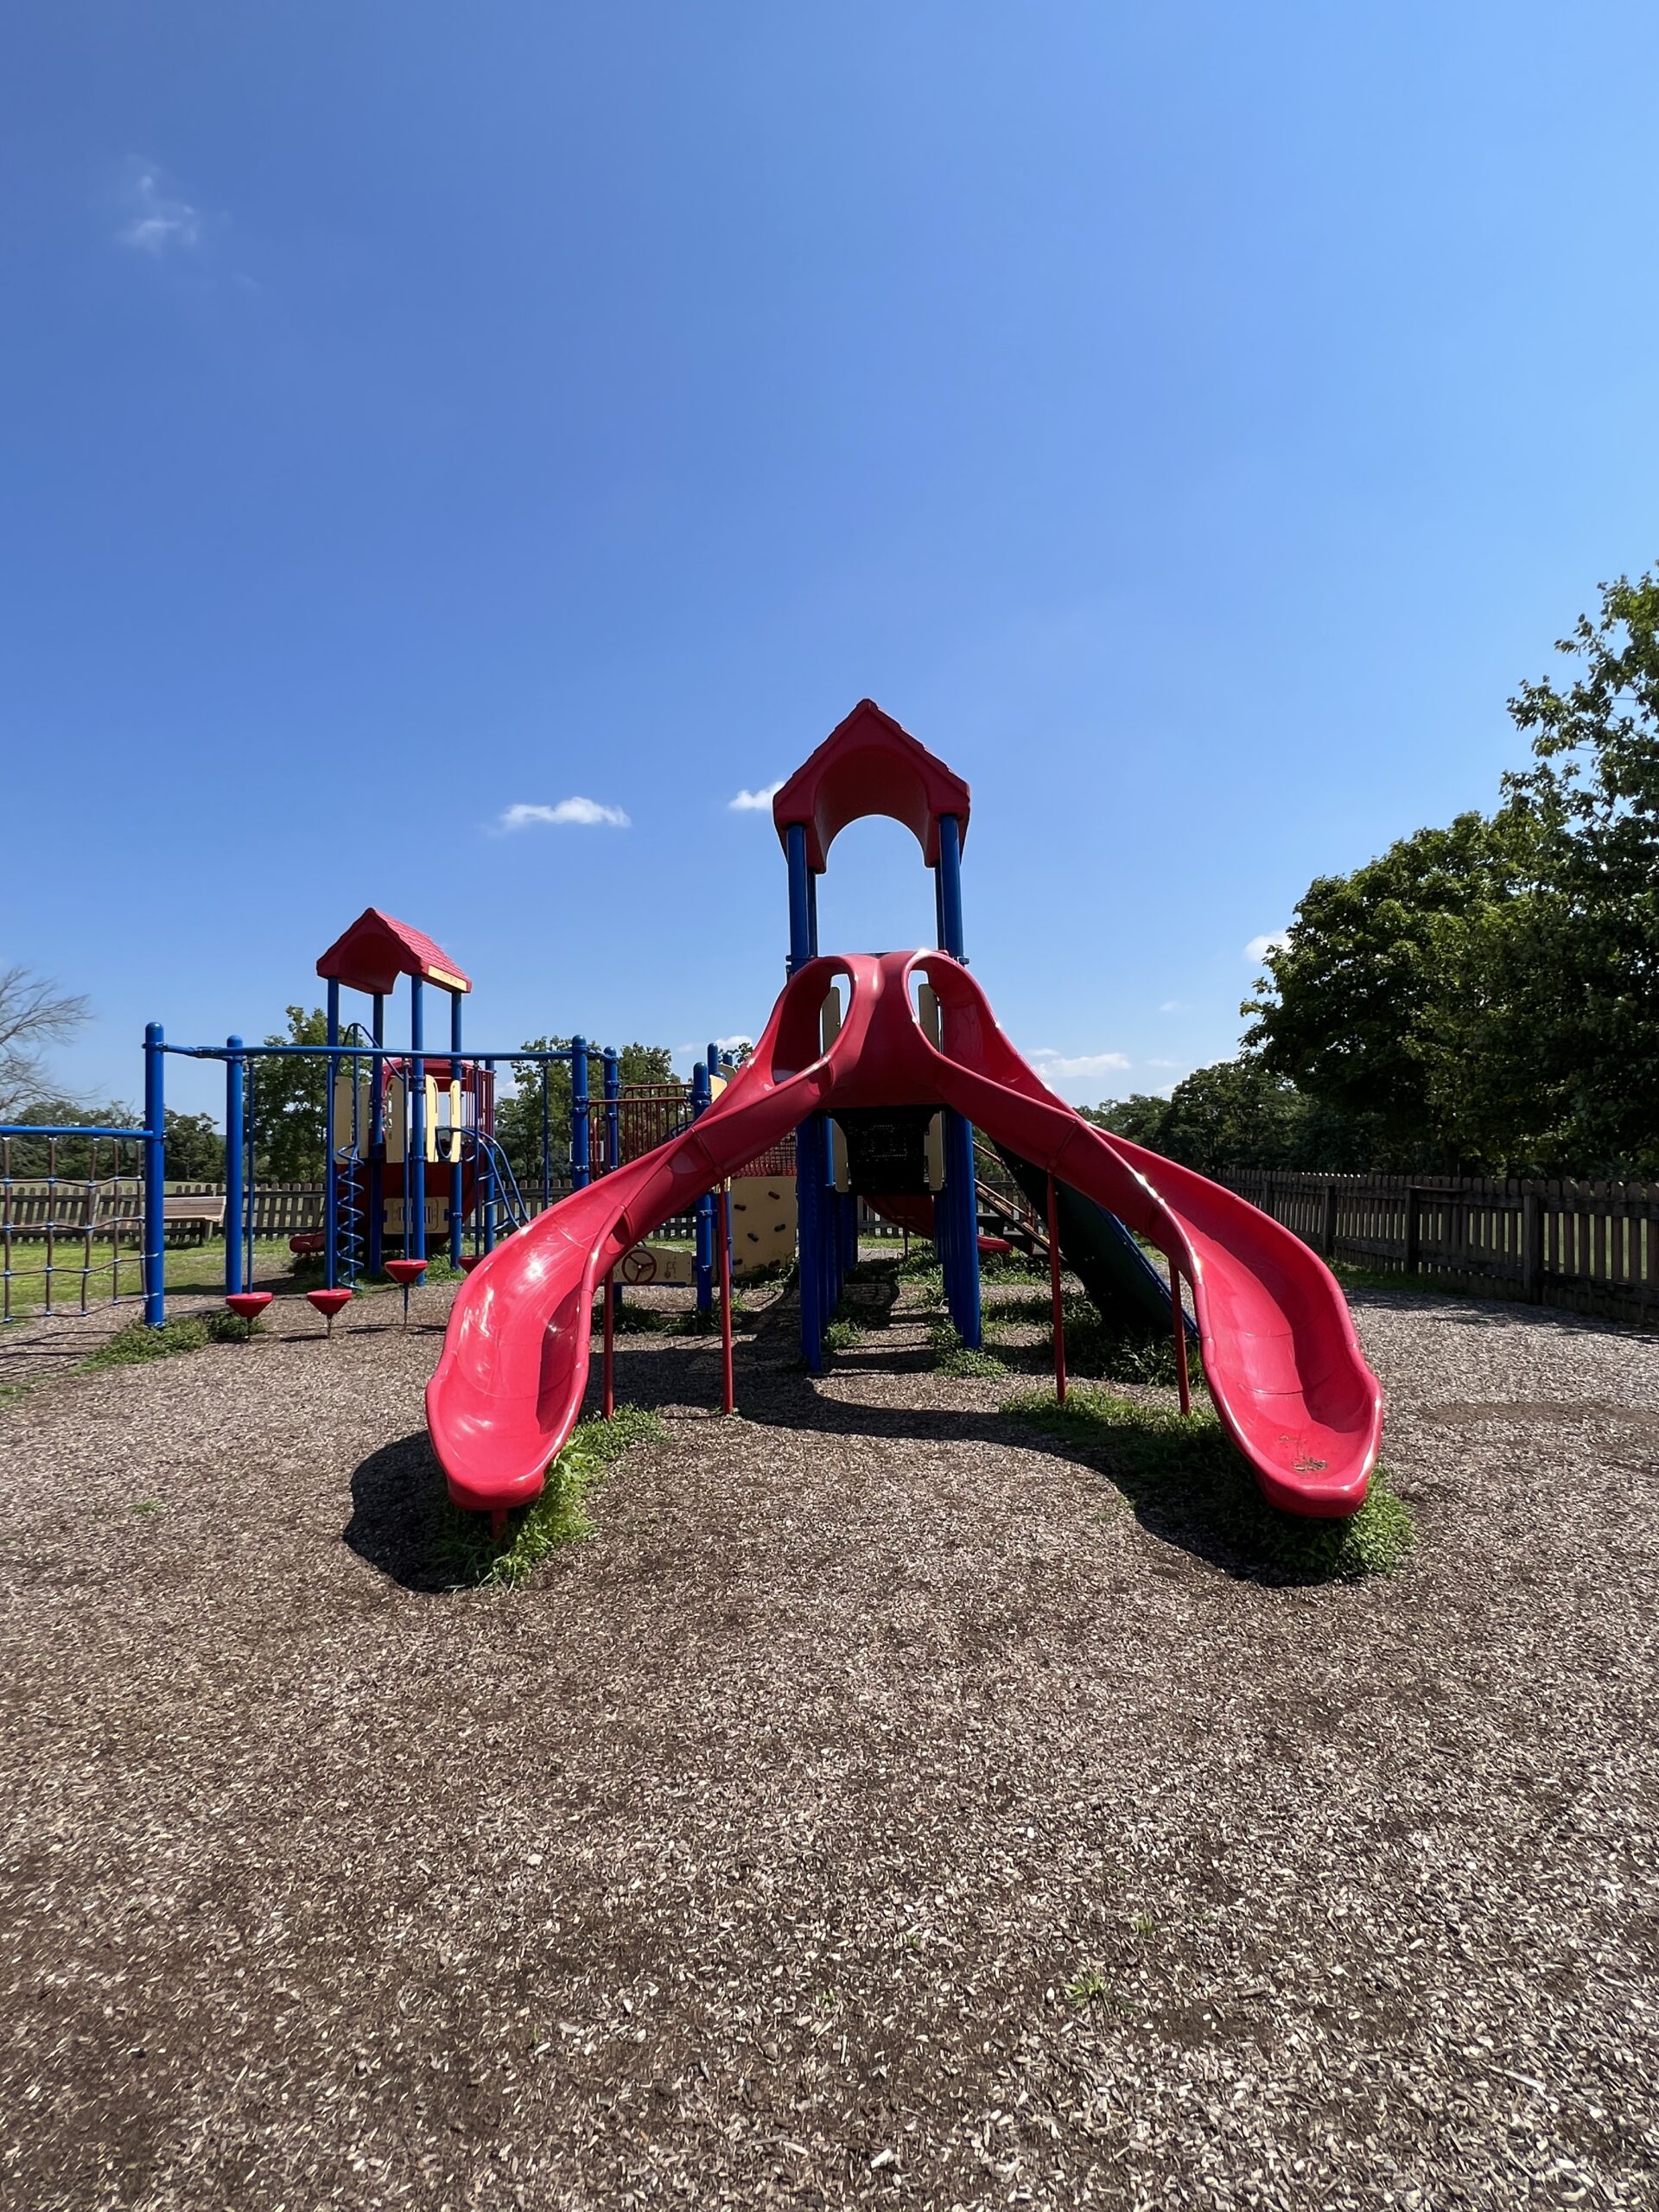 Alexandria Township Park Playground in Milford NJ - SLIDES - two slightly curvy slides together